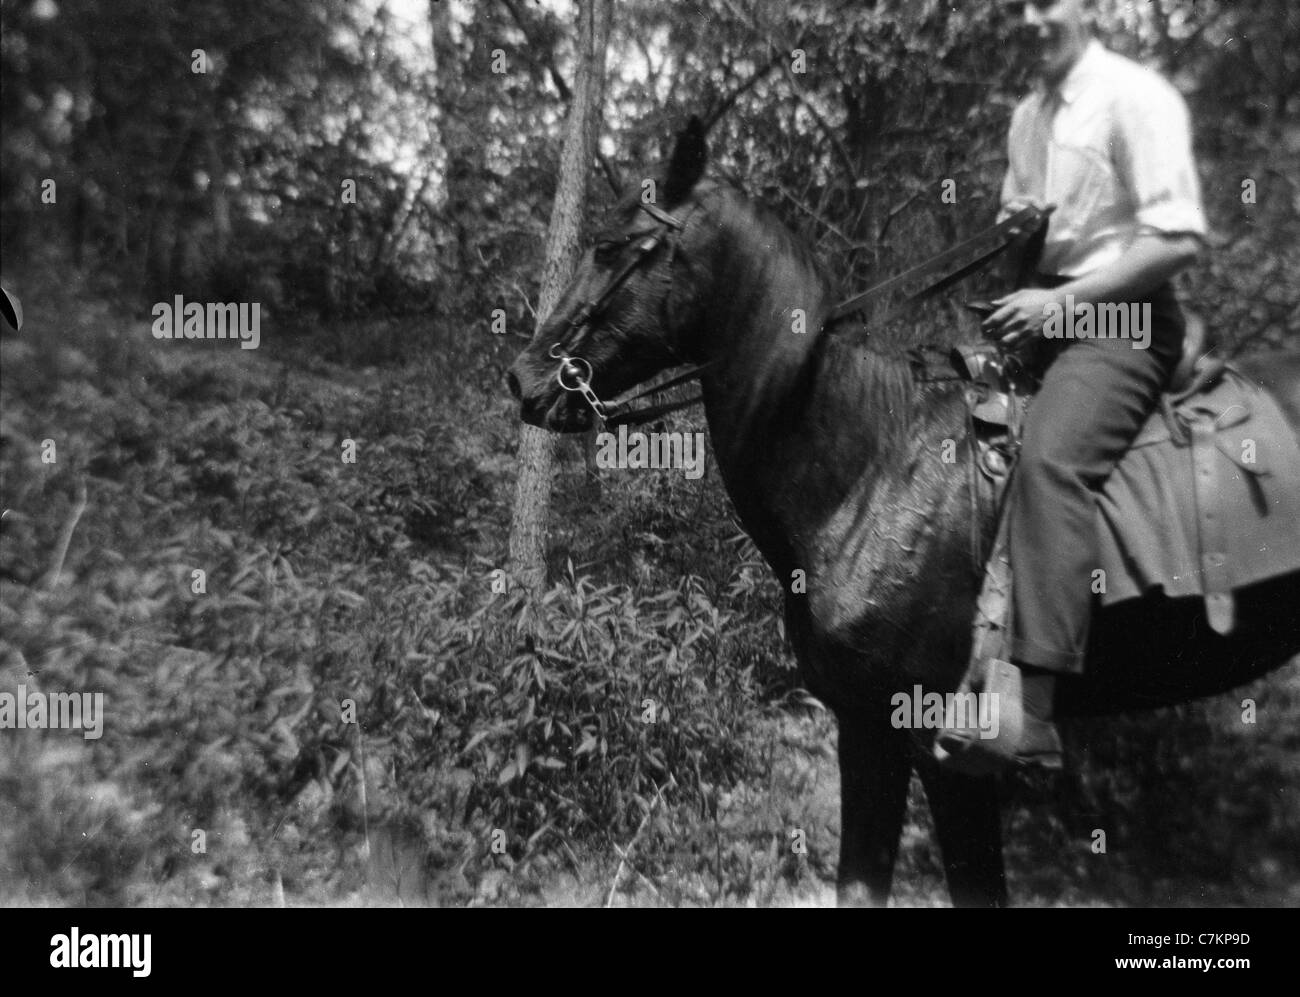 man on horse blurred background mystery male 1930s rural forest Stock Photo